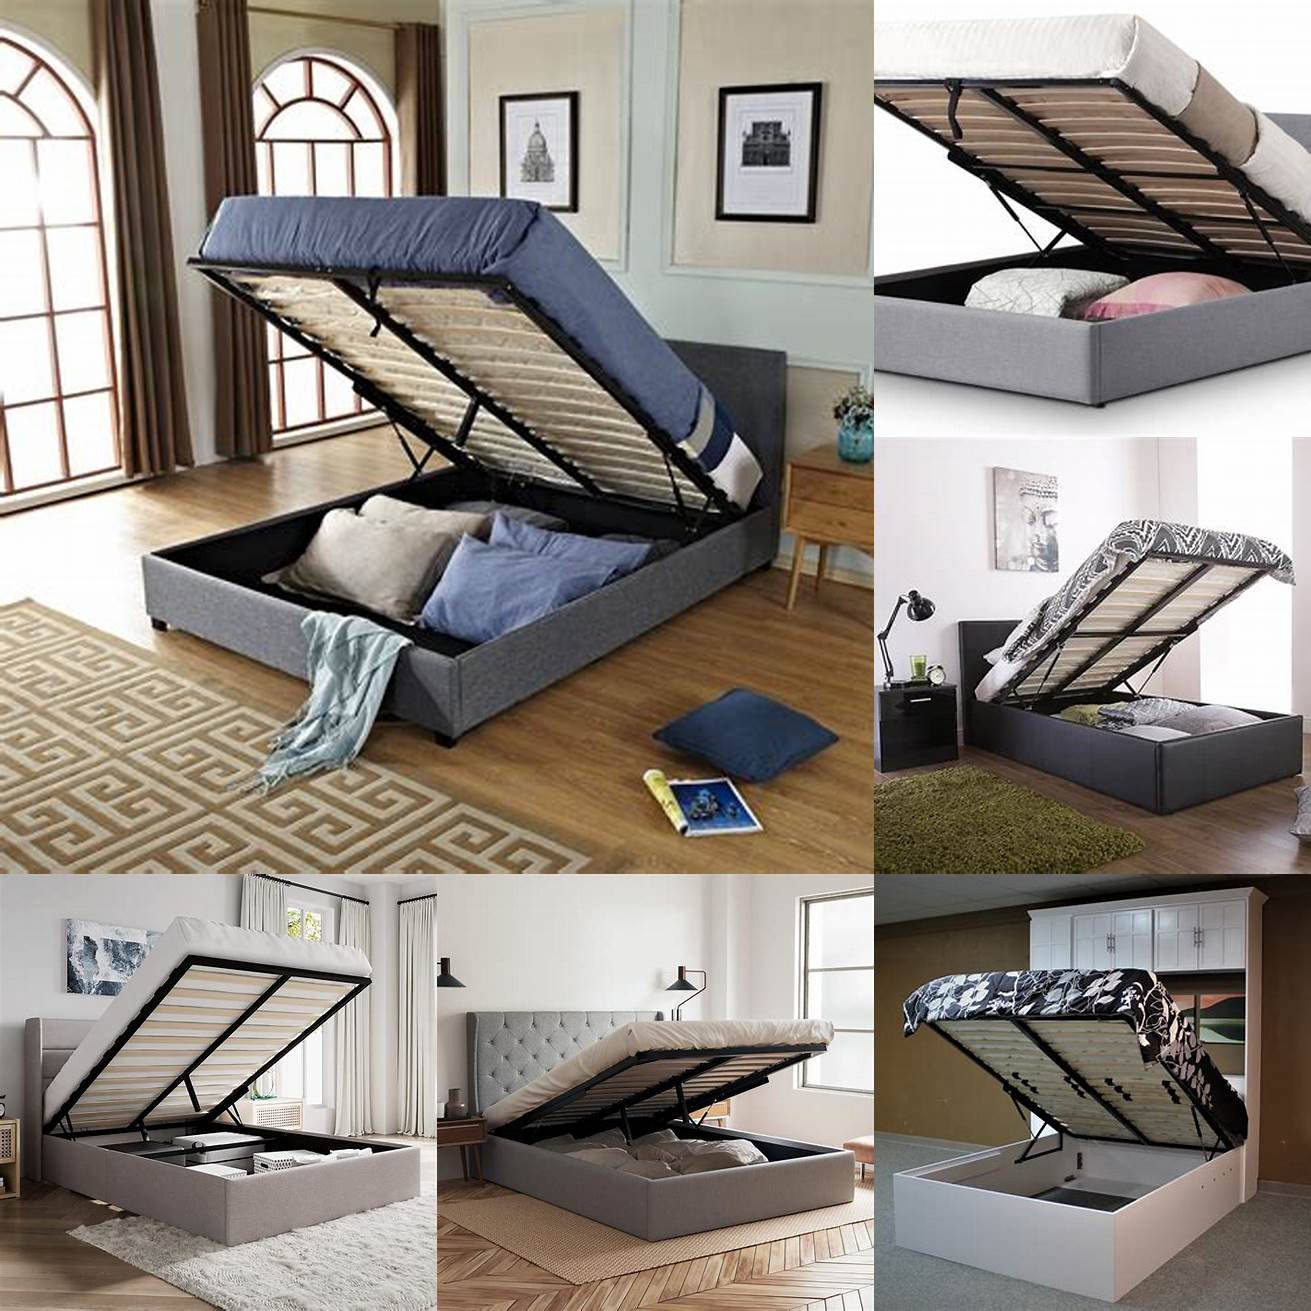 A lift-up storage bed